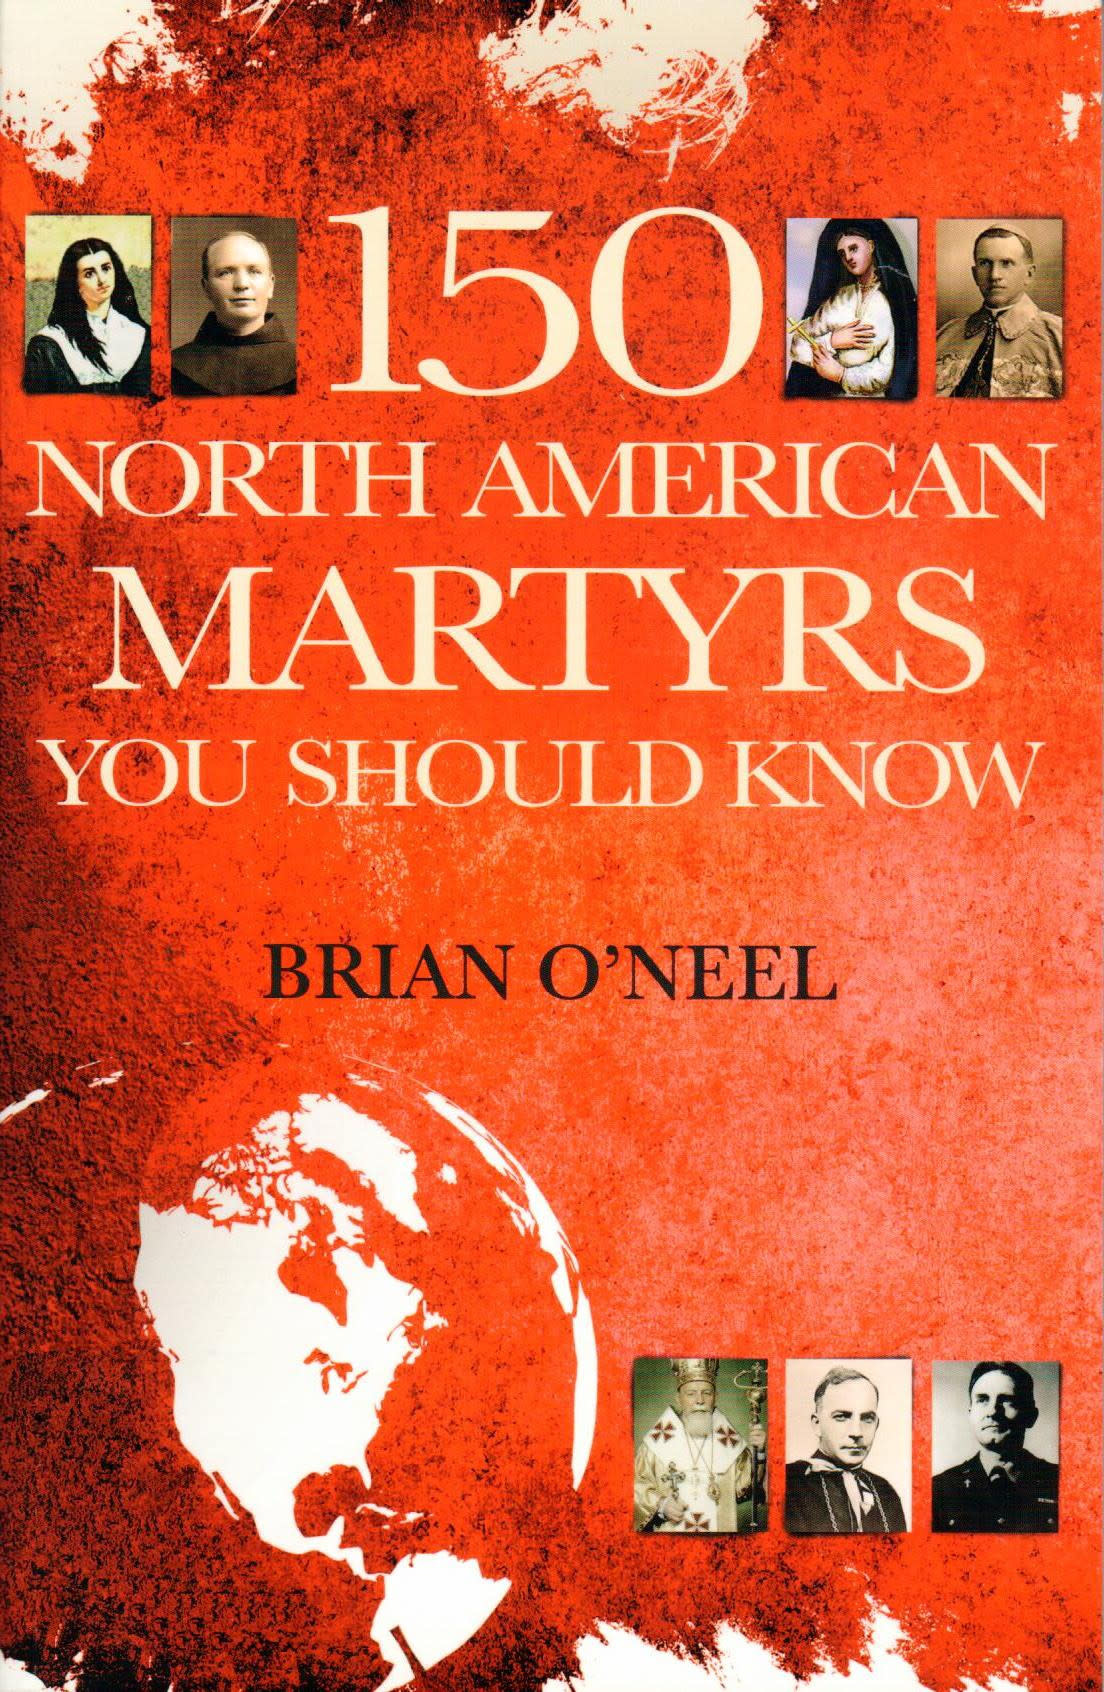 150 North American Martyrs You Should Know